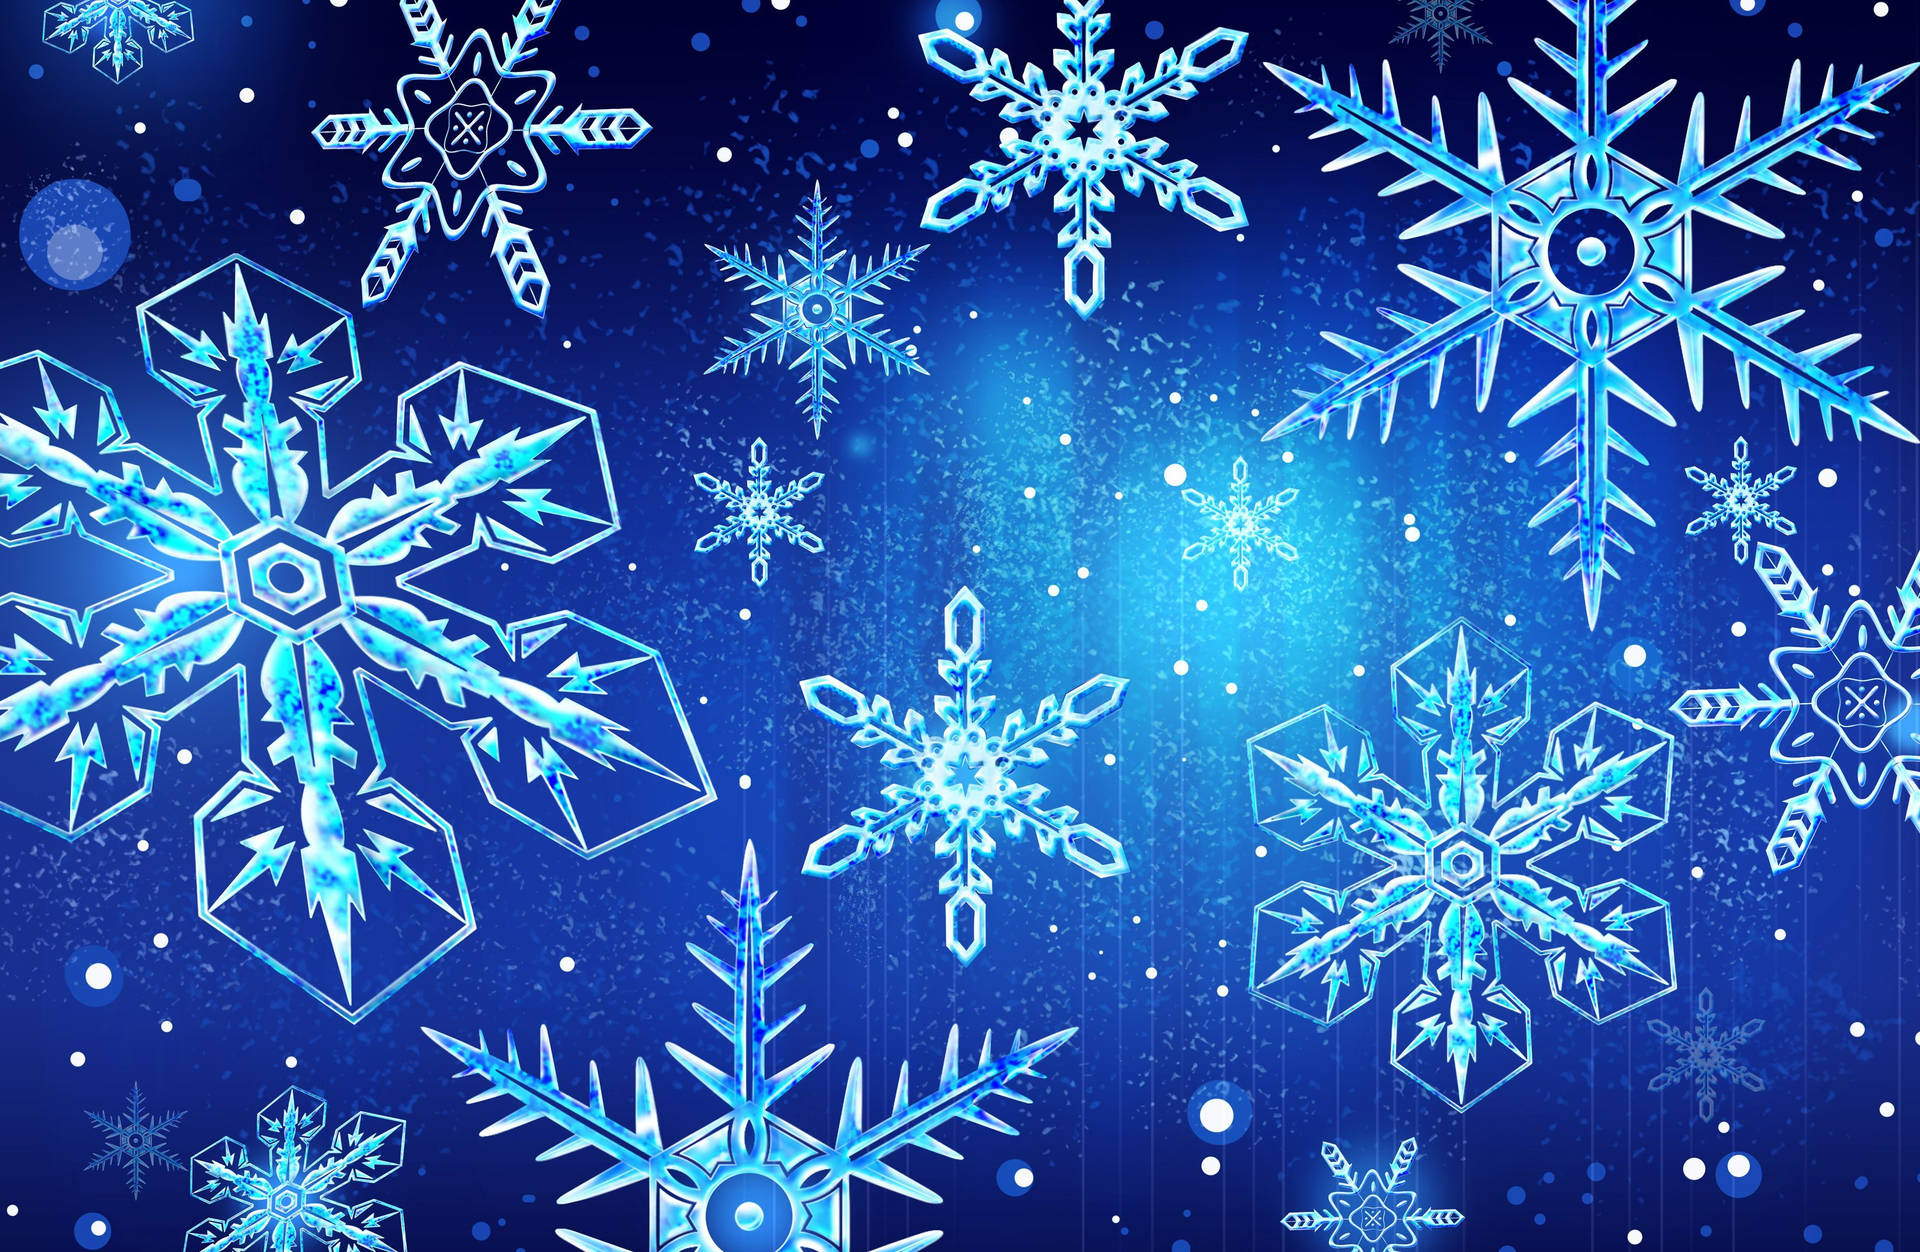 “make It A White Christmas With Snowflakes And Blue Hues” Background